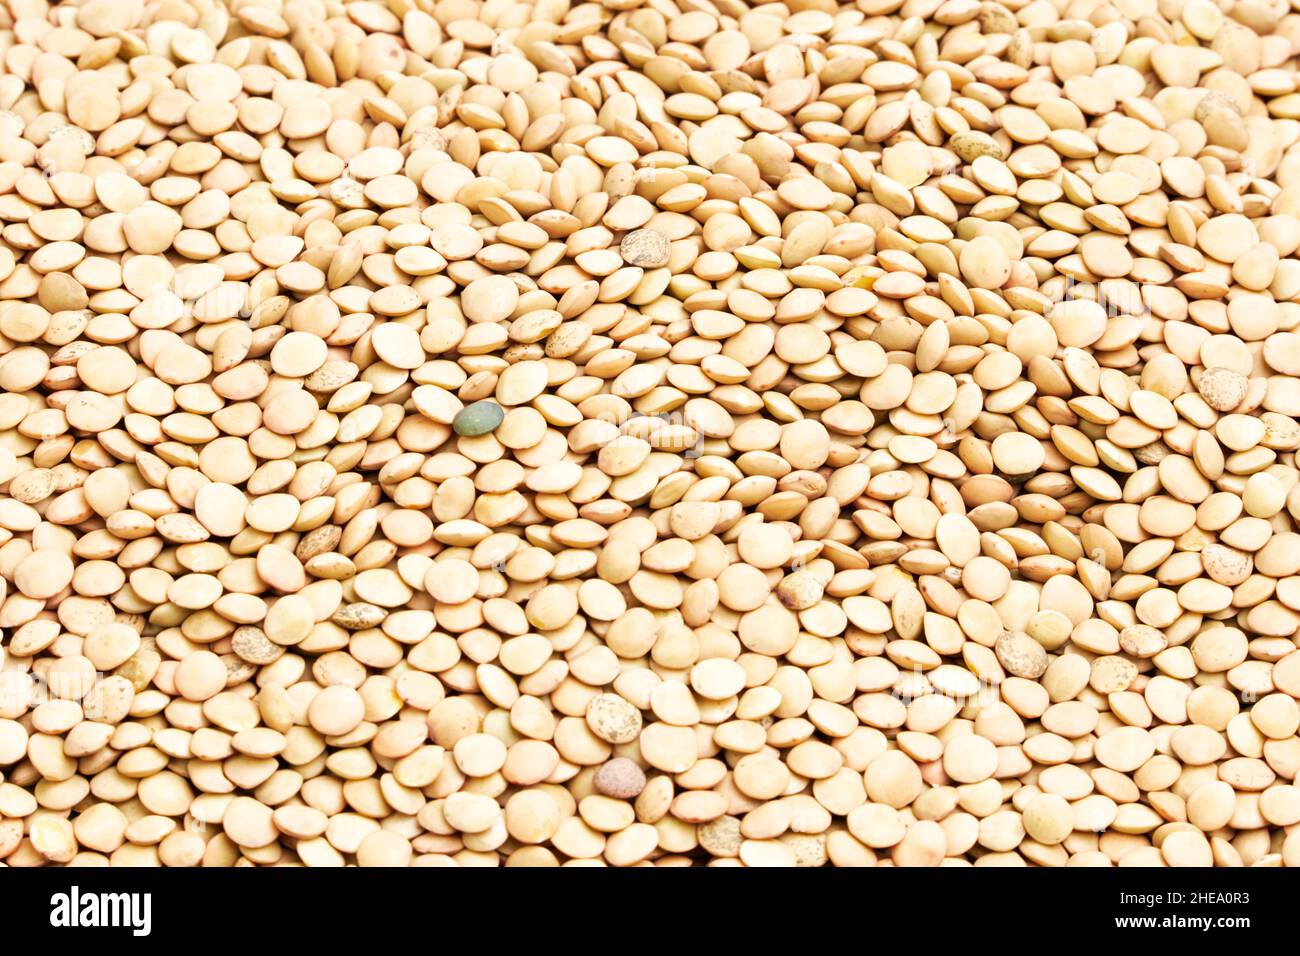 Background of dried green lentils. Healthy and vegan food concept Stock Photo